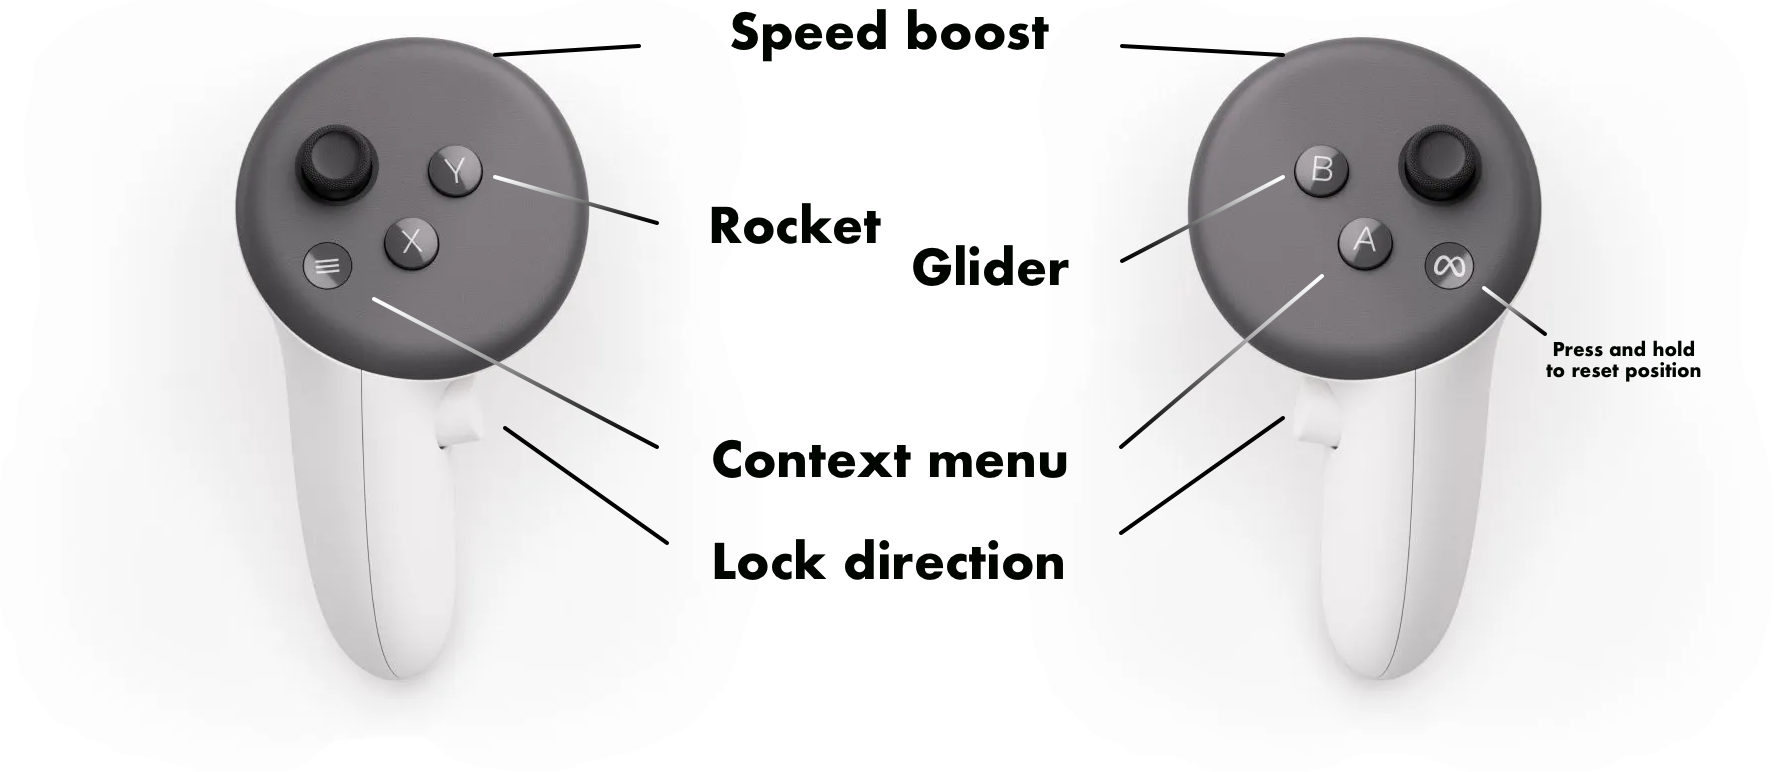 Descriptions of the buttons that are used in the VR game.